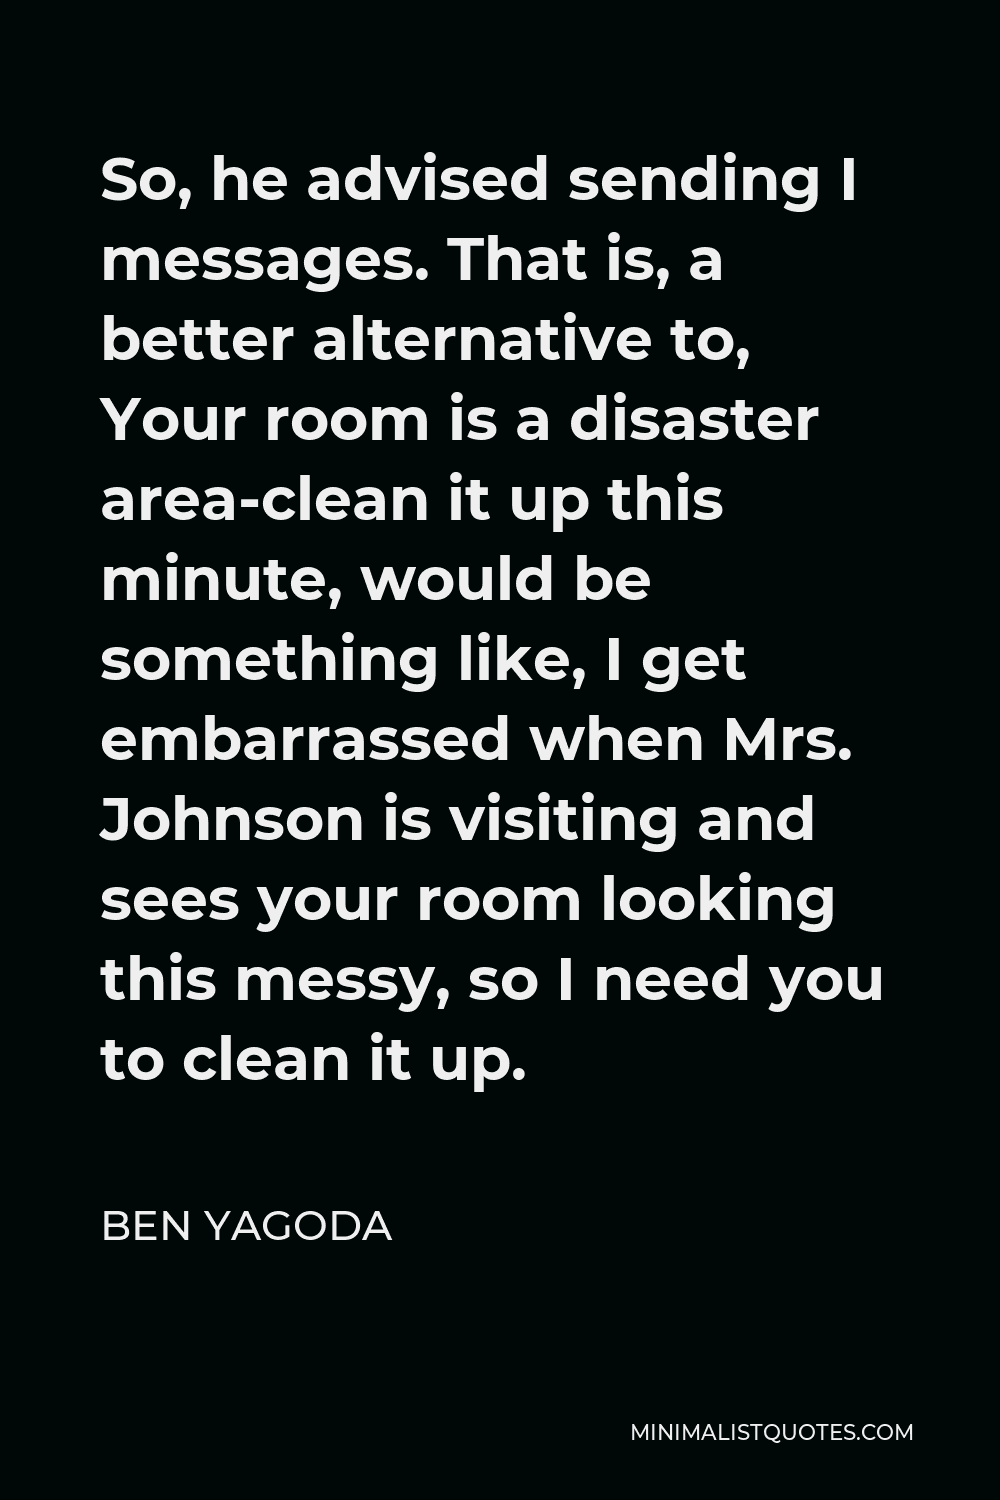 Ben Yagoda Quote - So, he advised sending I messages. That is, a better alternative to, Your room is a disaster area-clean it up this minute, would be something like, I get embarrassed when Mrs. Johnson is visiting and sees your room looking this messy, so I need you to clean it up.